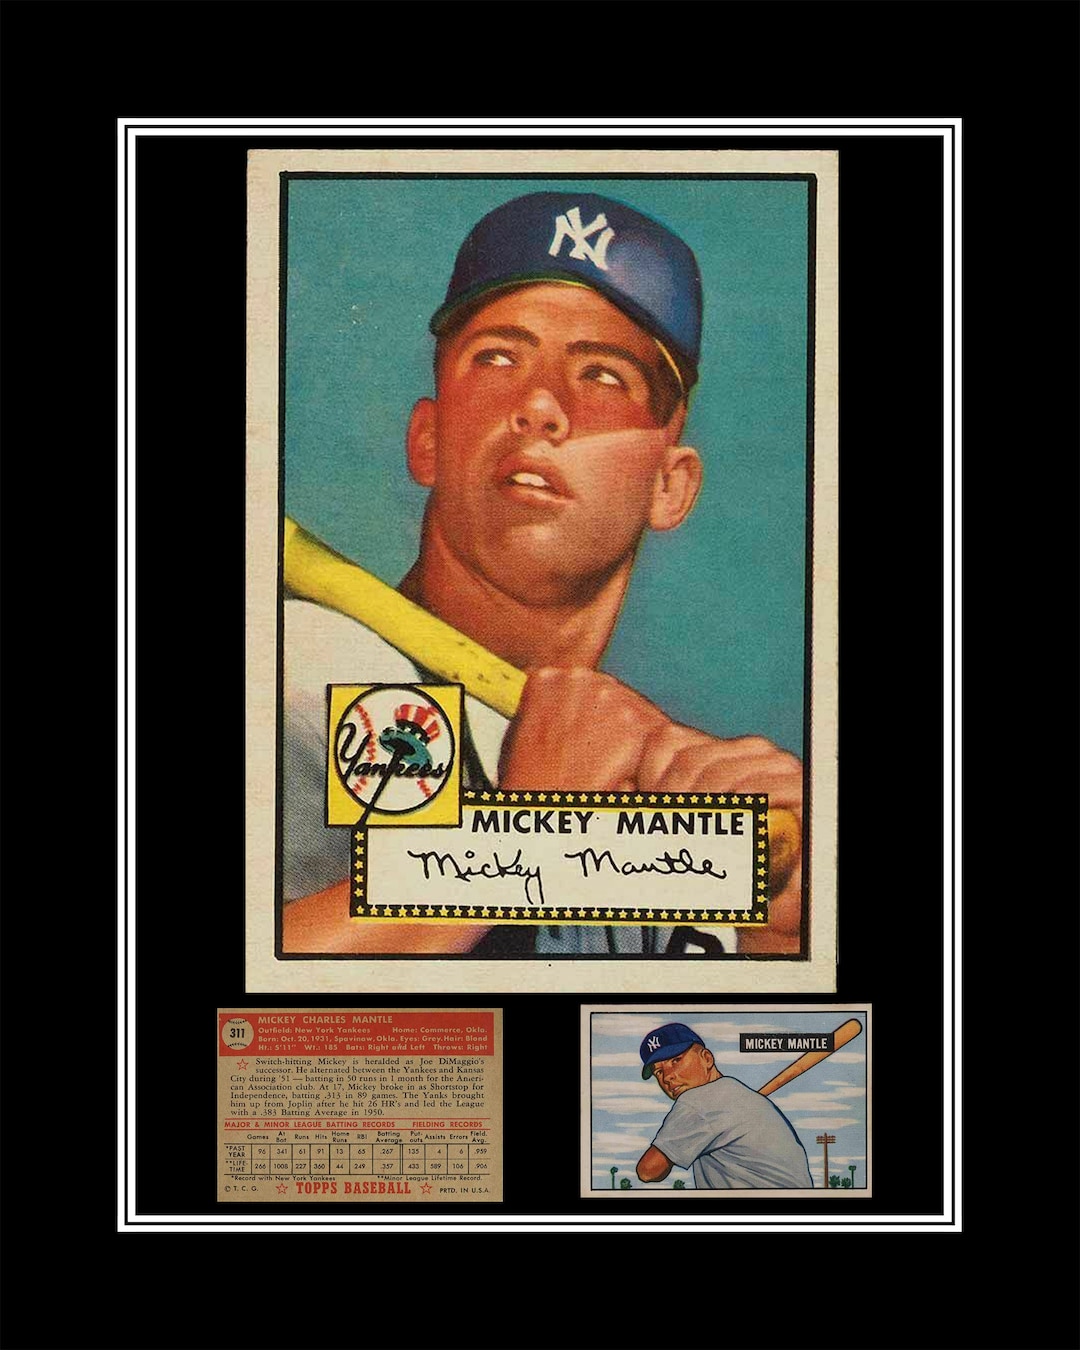 Mickey Mantle cards continue to set records, 1951 Bowman rookie